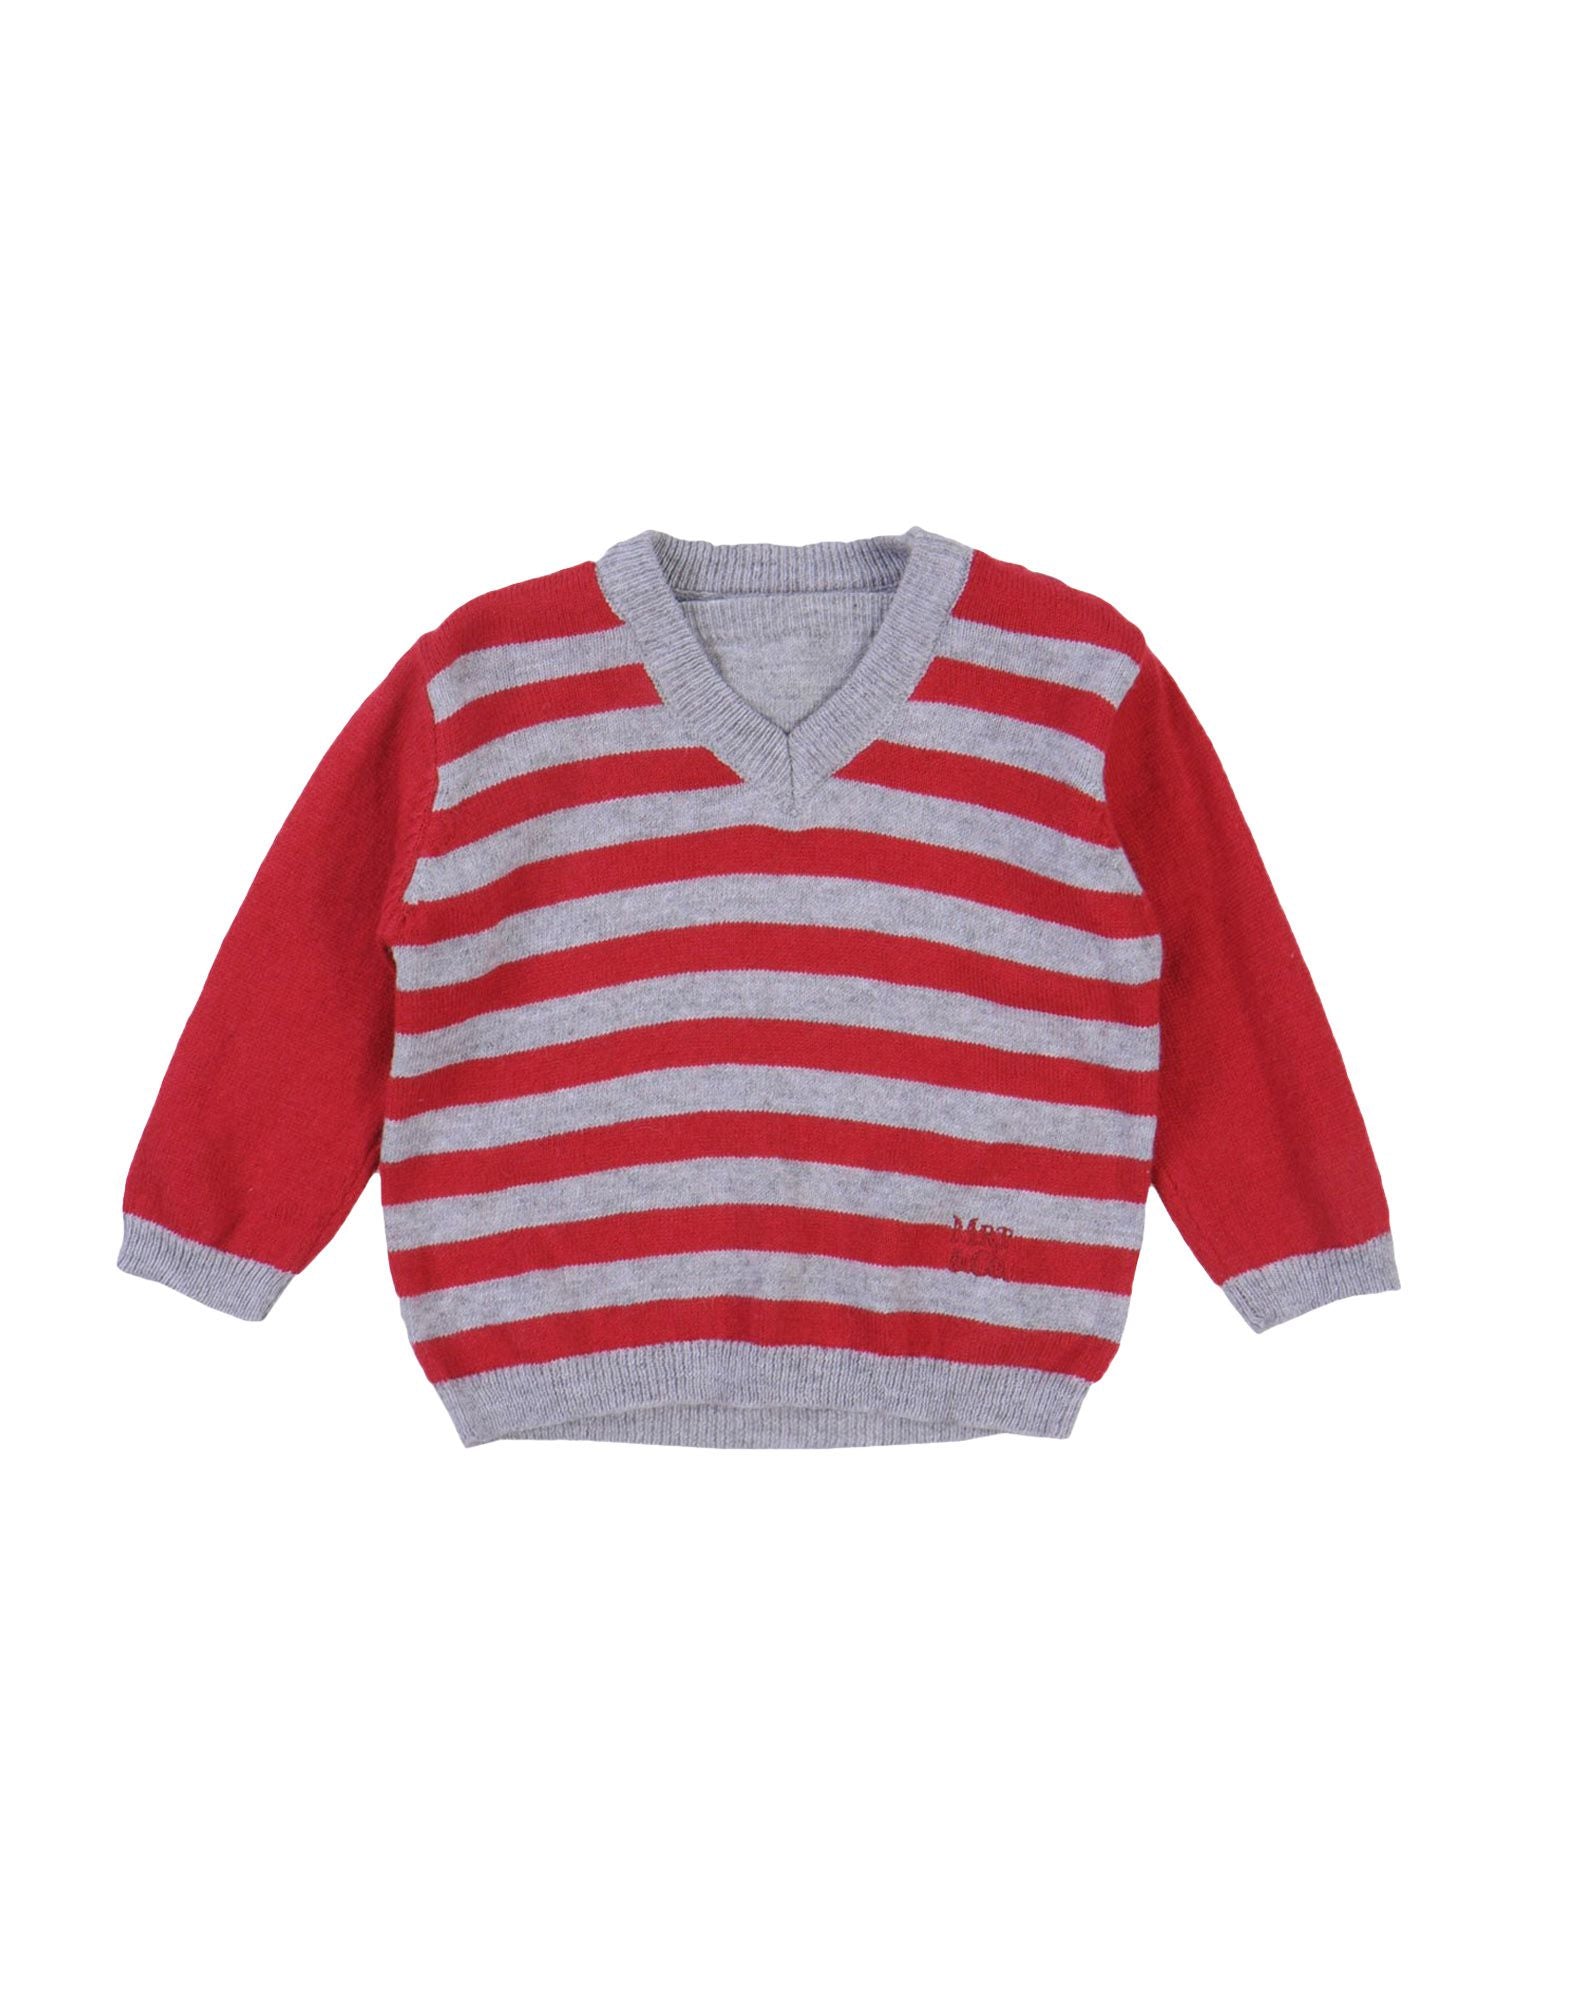 
  Tricot sweater from the Mirtillo Children's Clothing line, gray striped pattern
  and burgundy...